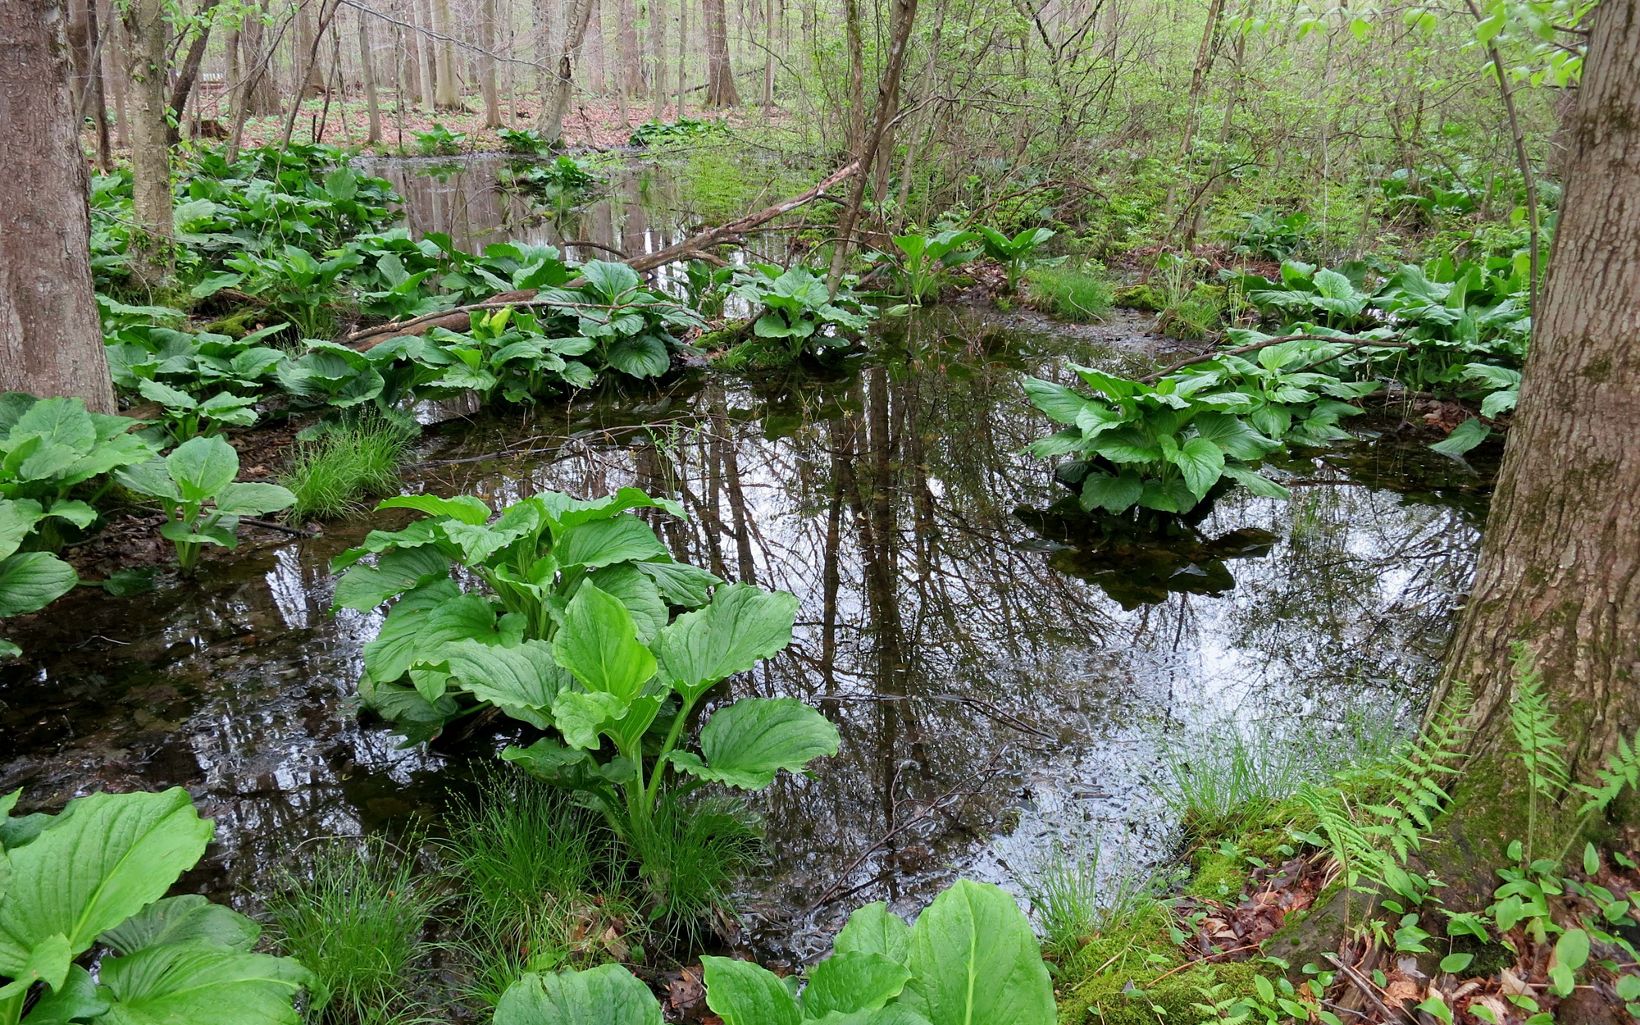 Quality Wetlands Skunk cabbage can be spotted in the preserve's vernal pools. © Terry Seidel/TNC